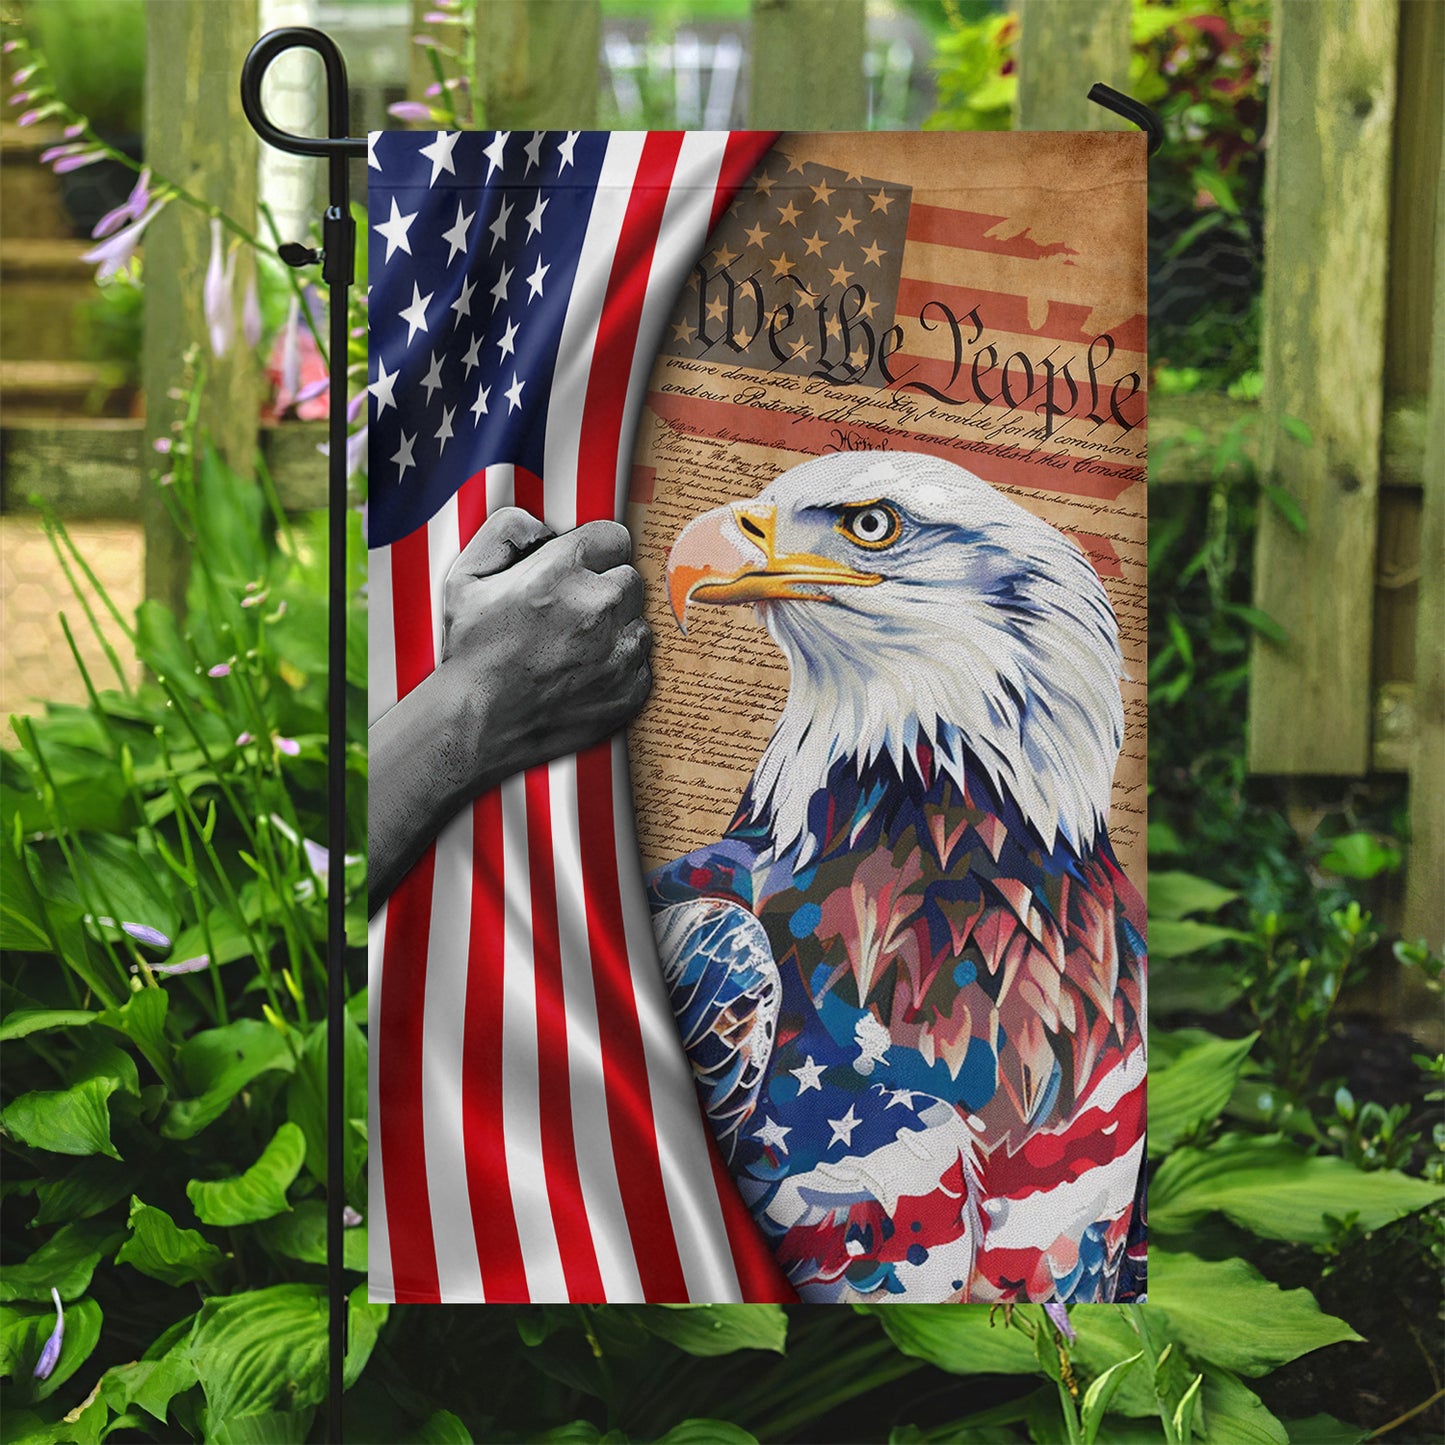 July 4th Eagle Garden Flag & House Flag, Gripping The Spirit Of Liberty, Independence Day Yard Flag Gift For Eagle Lovers